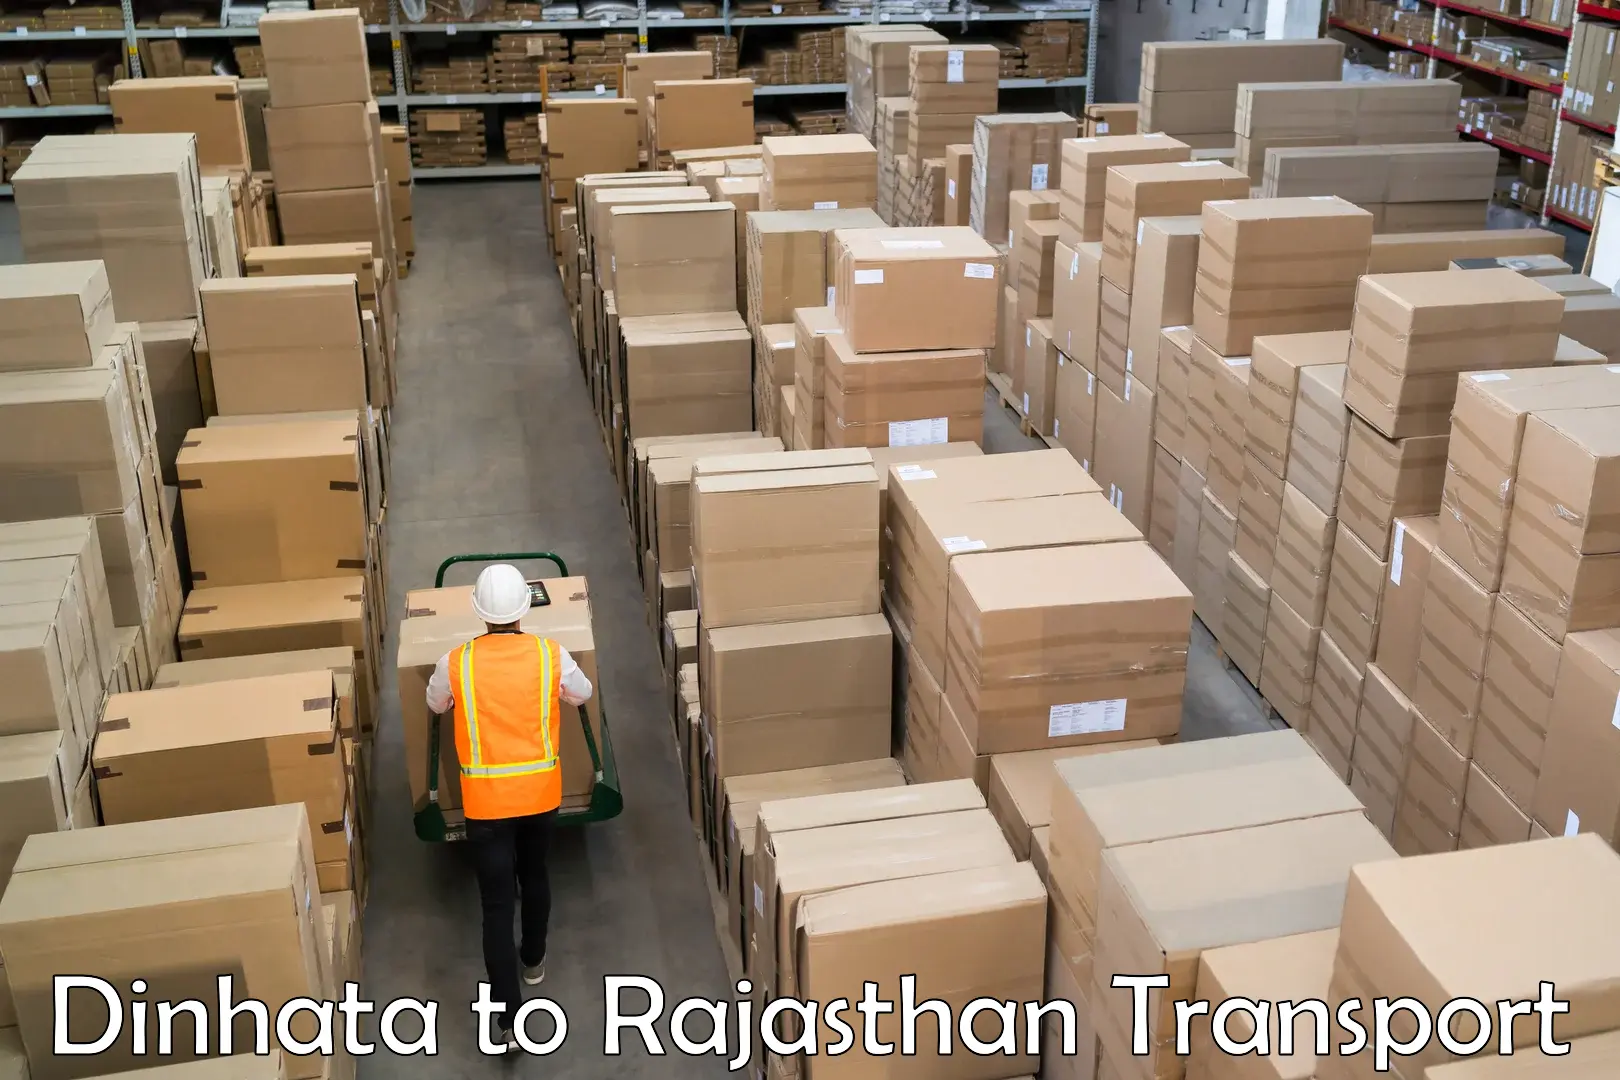 Truck transport companies in India Dinhata to Malsisar